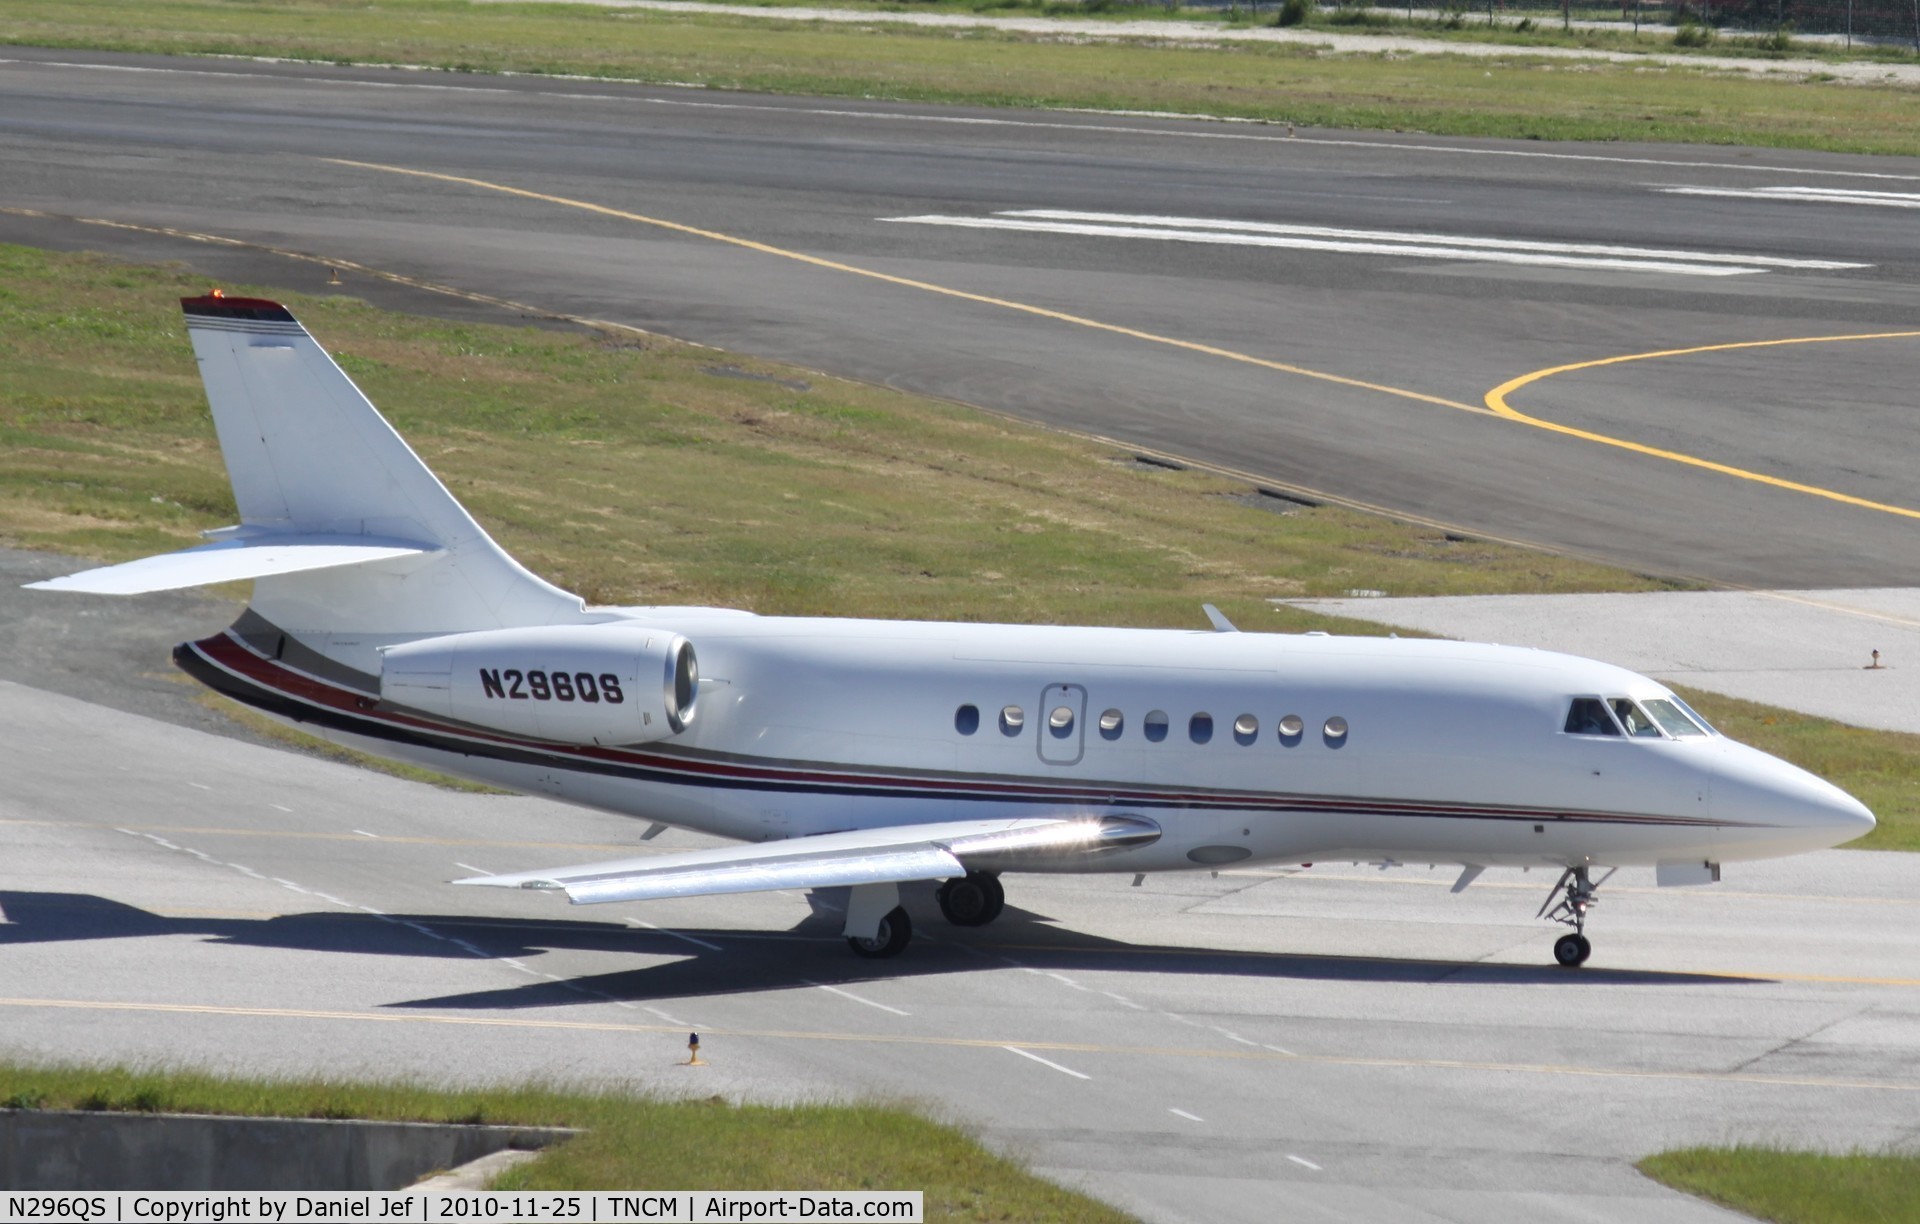 N296QS, 2002 Dassault Falcon 2000 C/N 196, N296Qs taxing to the holding point A for take off